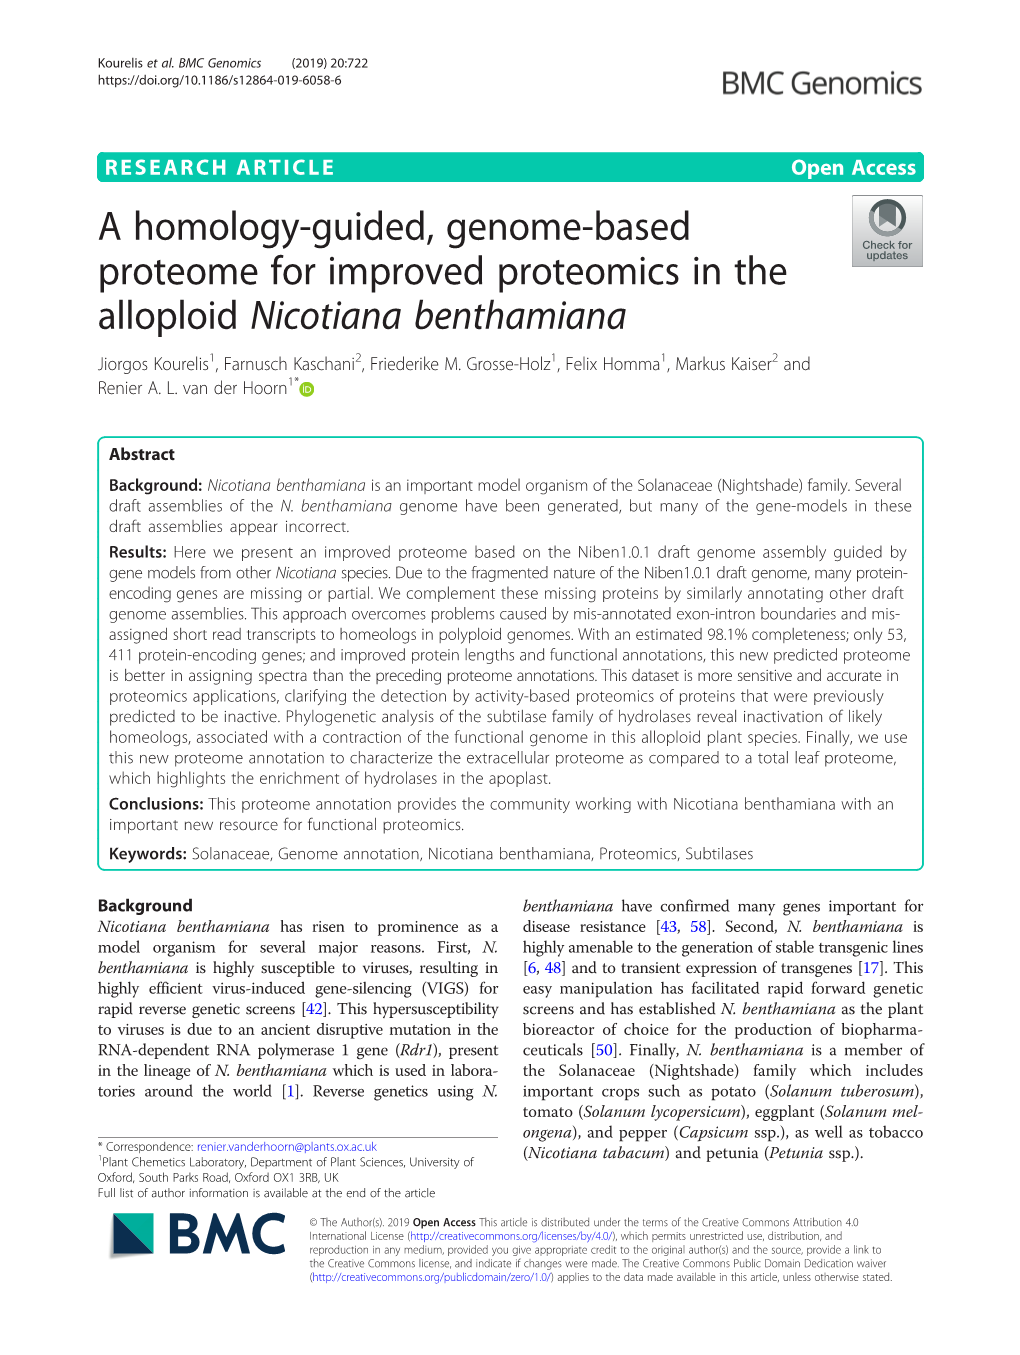 A Homology-Guided, Genome-Based Proteome for Improved Proteomics in the Alloploid Nicotiana Benthamiana Jiorgos Kourelis1, Farnusch Kaschani2, Friederike M